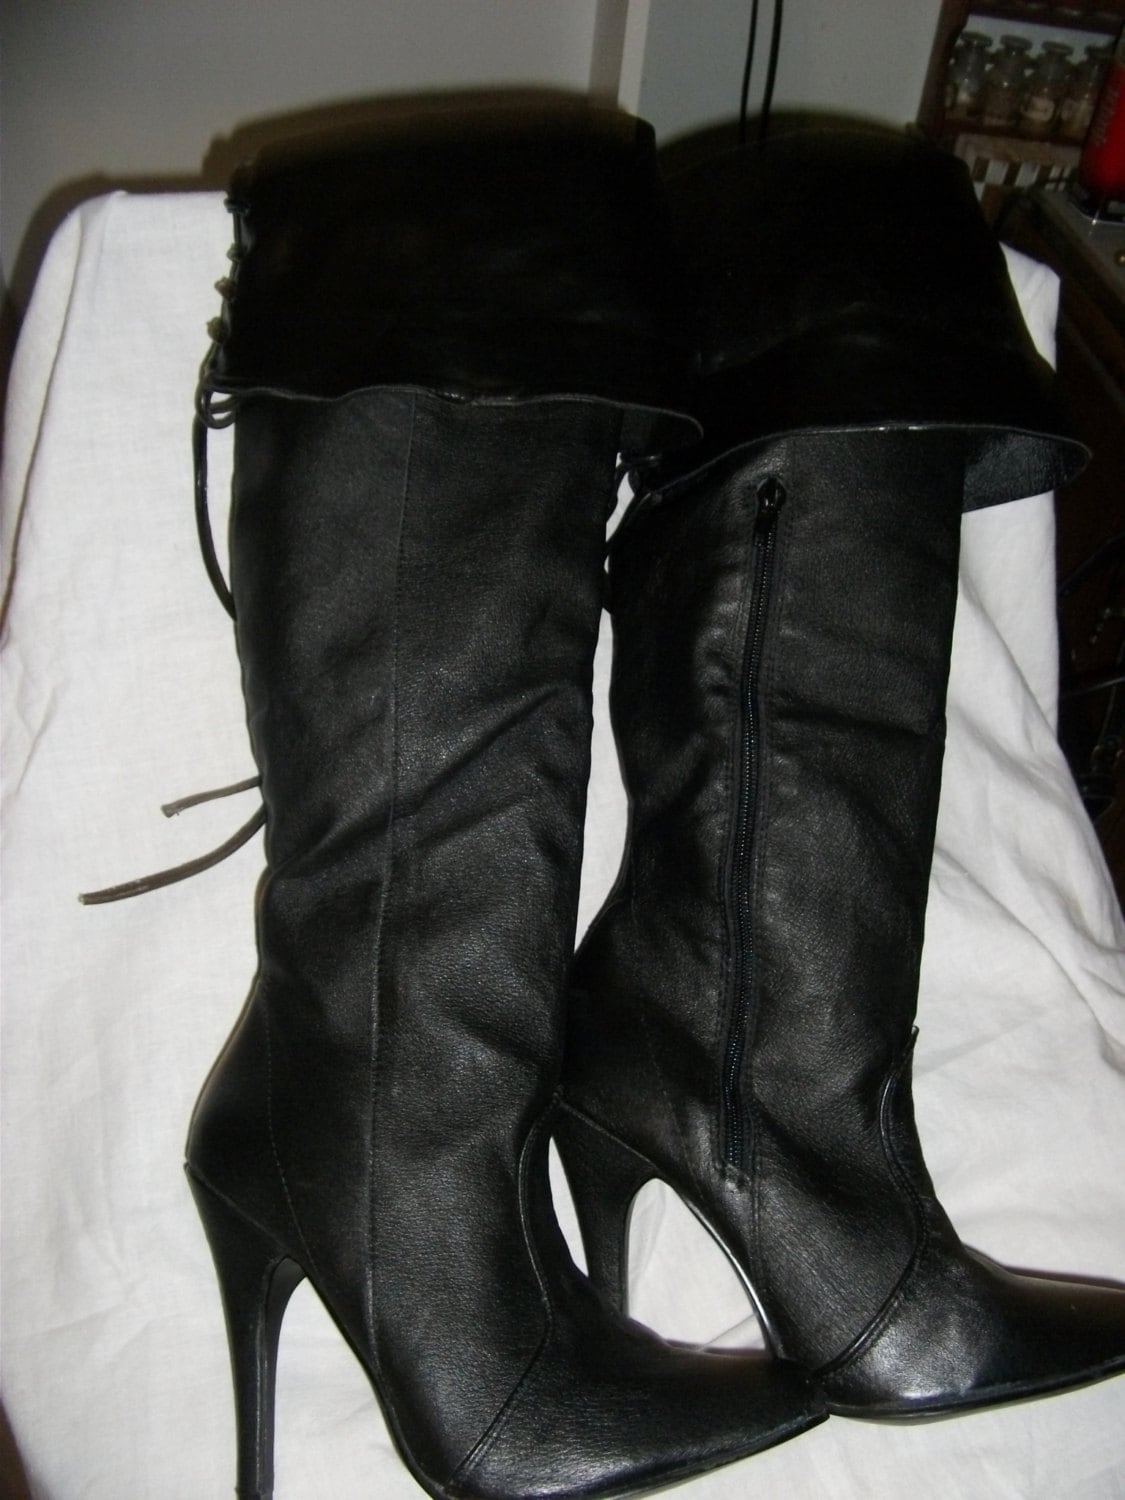 Vintage Ladies Thigh High Pirate Boots from Ellie 4 1/2